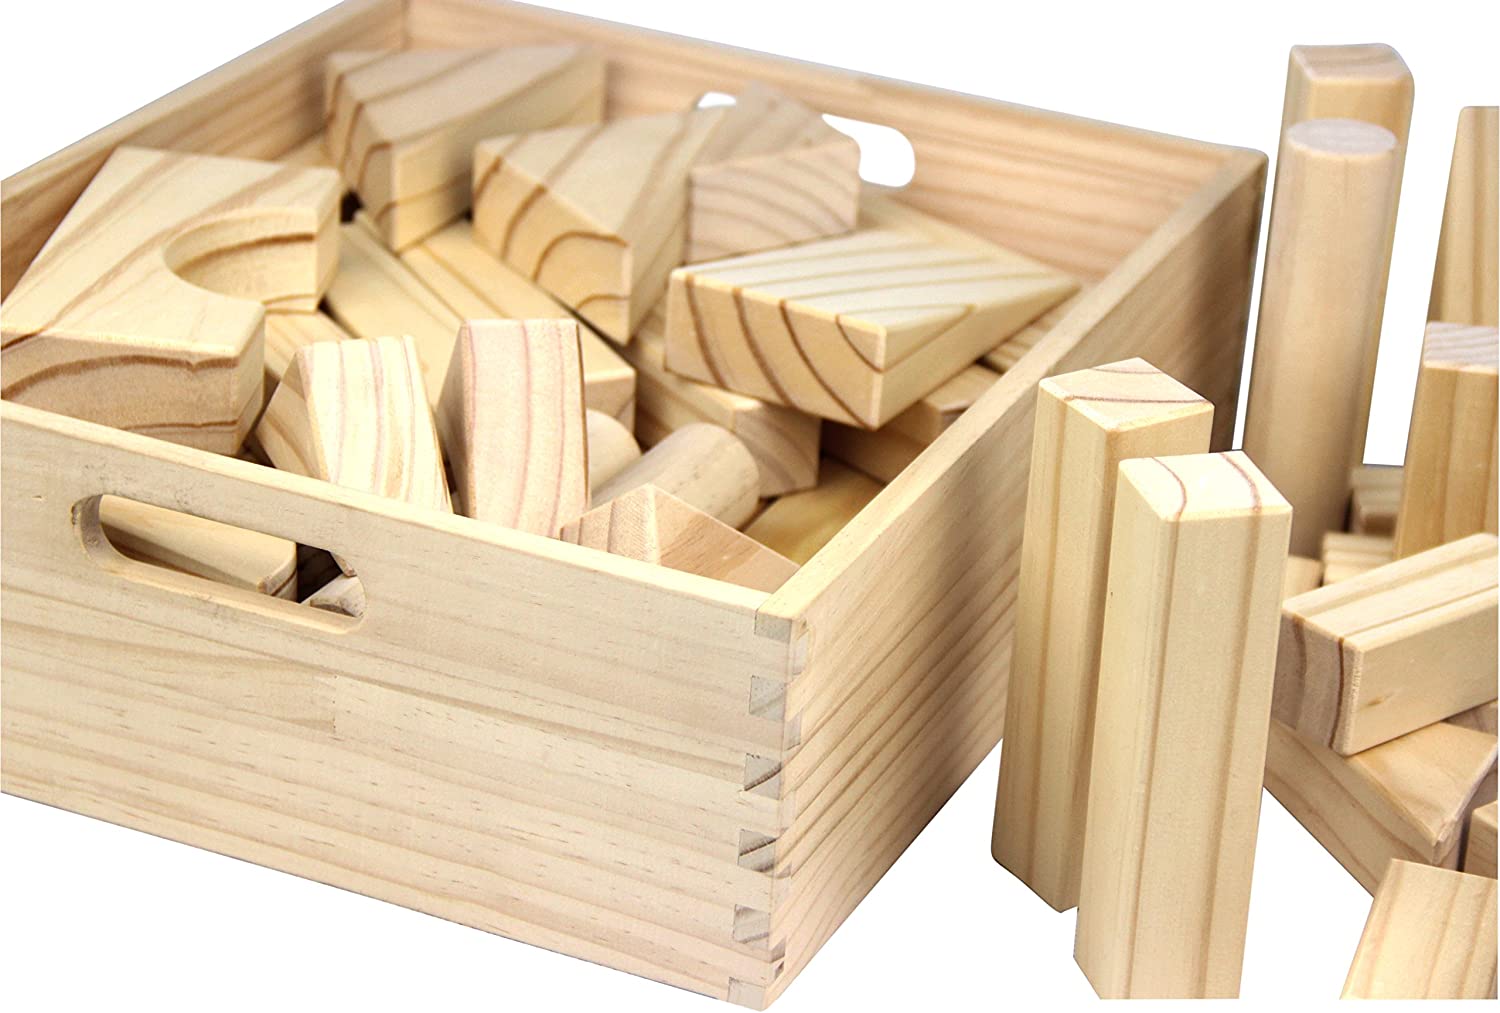 64 Piece Set Childrens Wood Building Blocks with Solid Wooden Storage Tray Holder Made from Solid Organic BPA-Free Natural New Zealand Pinewood MOD Complete Extra Large Size 